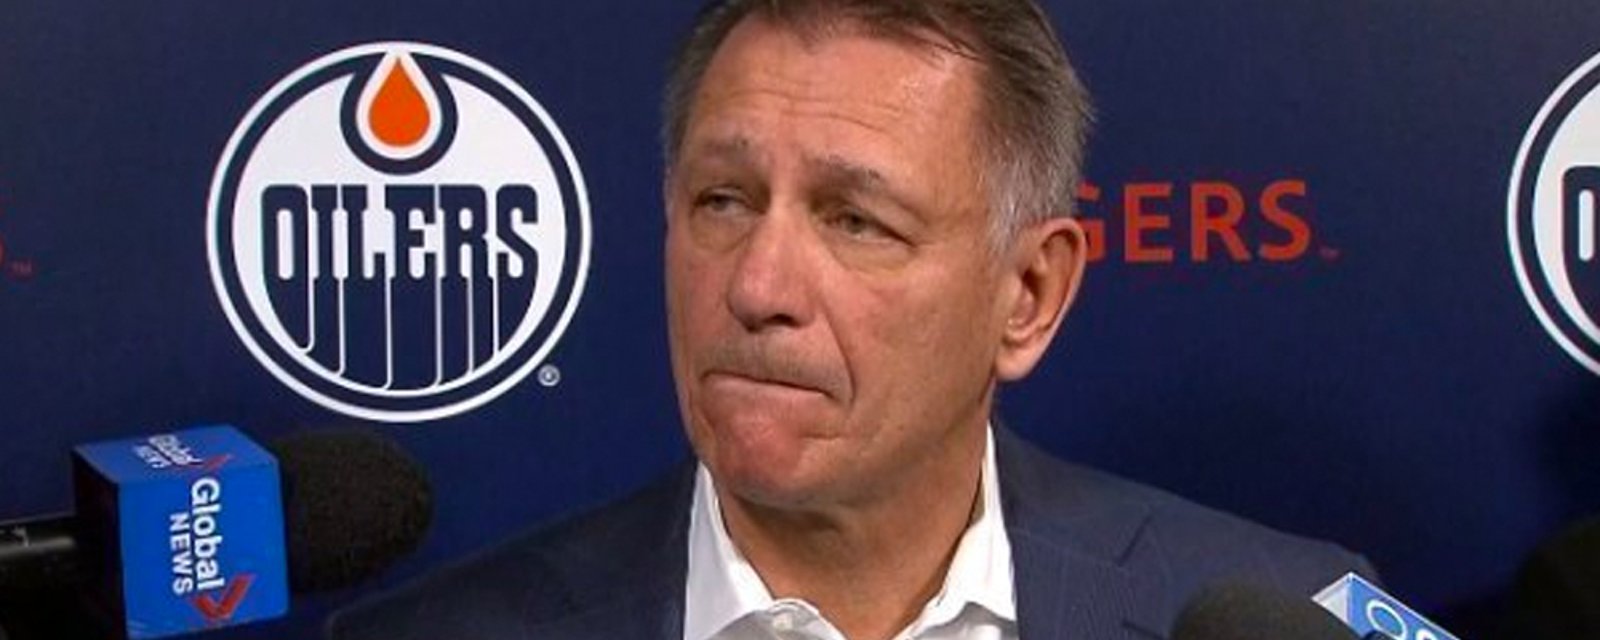 Ken Holland confirms buy outs, free agent signings and his offseason plans